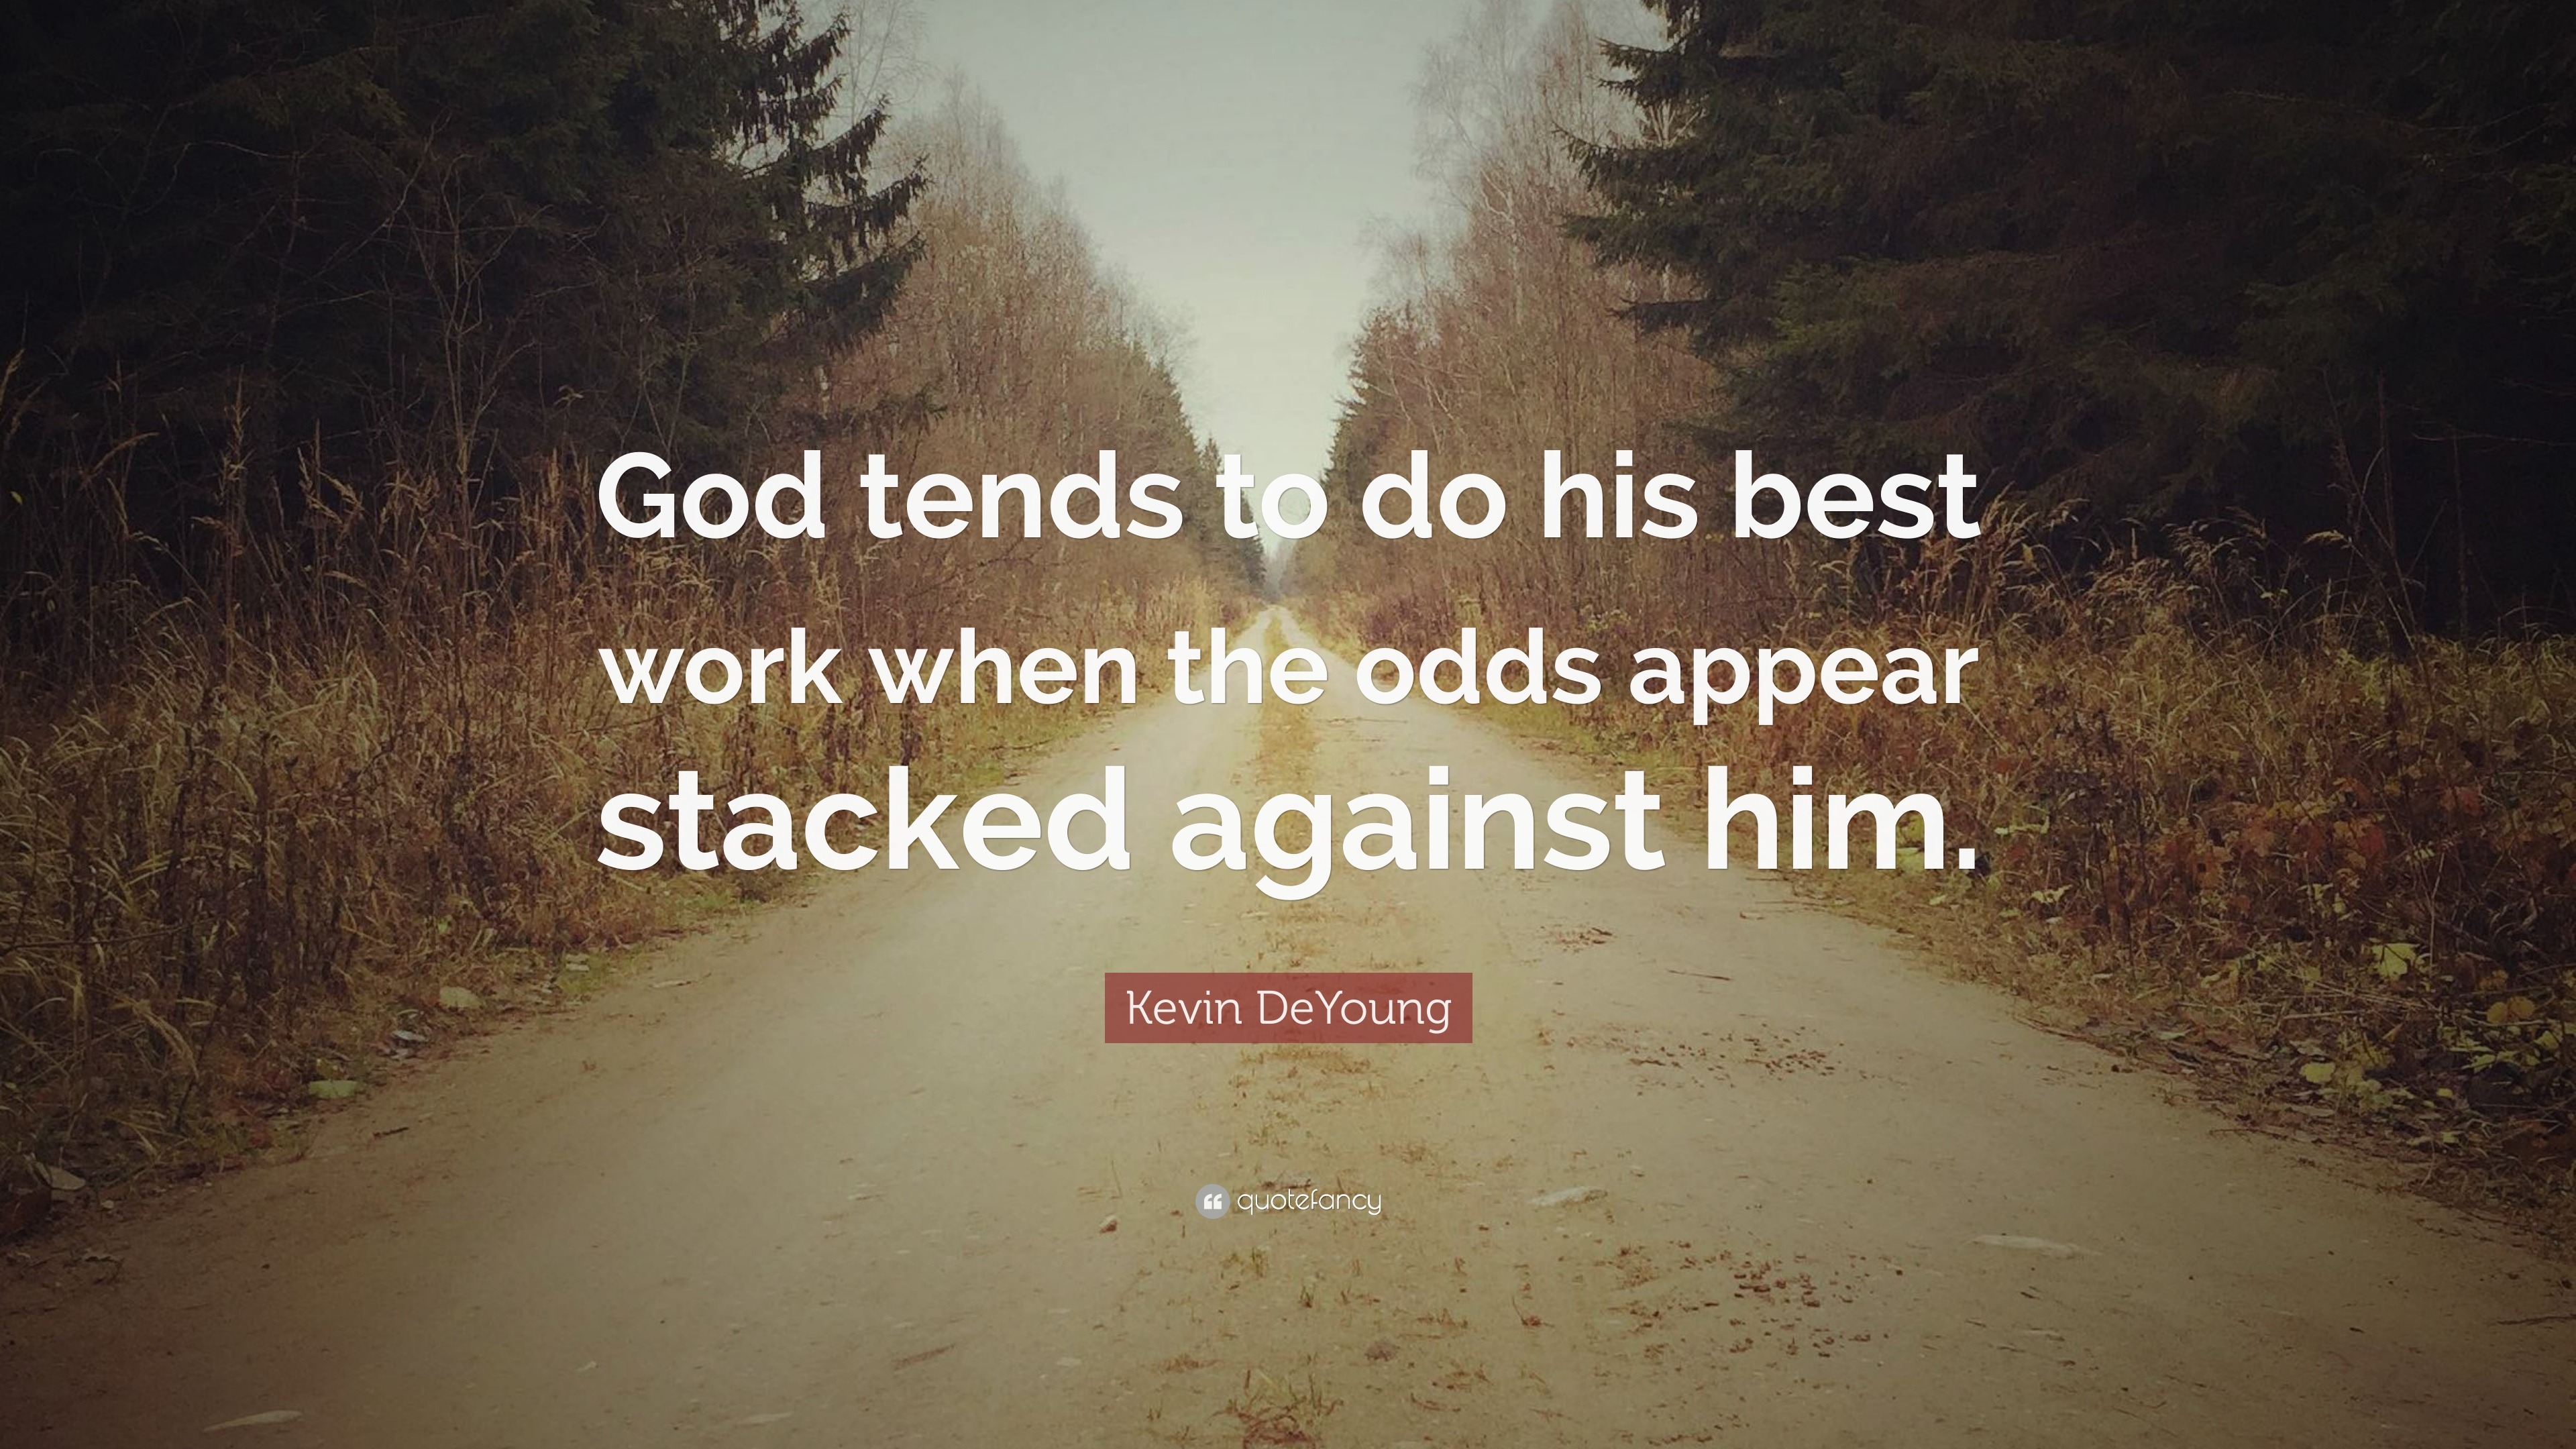 Kevin DeYoung Quote: “God tends to do his best work when the odds ...